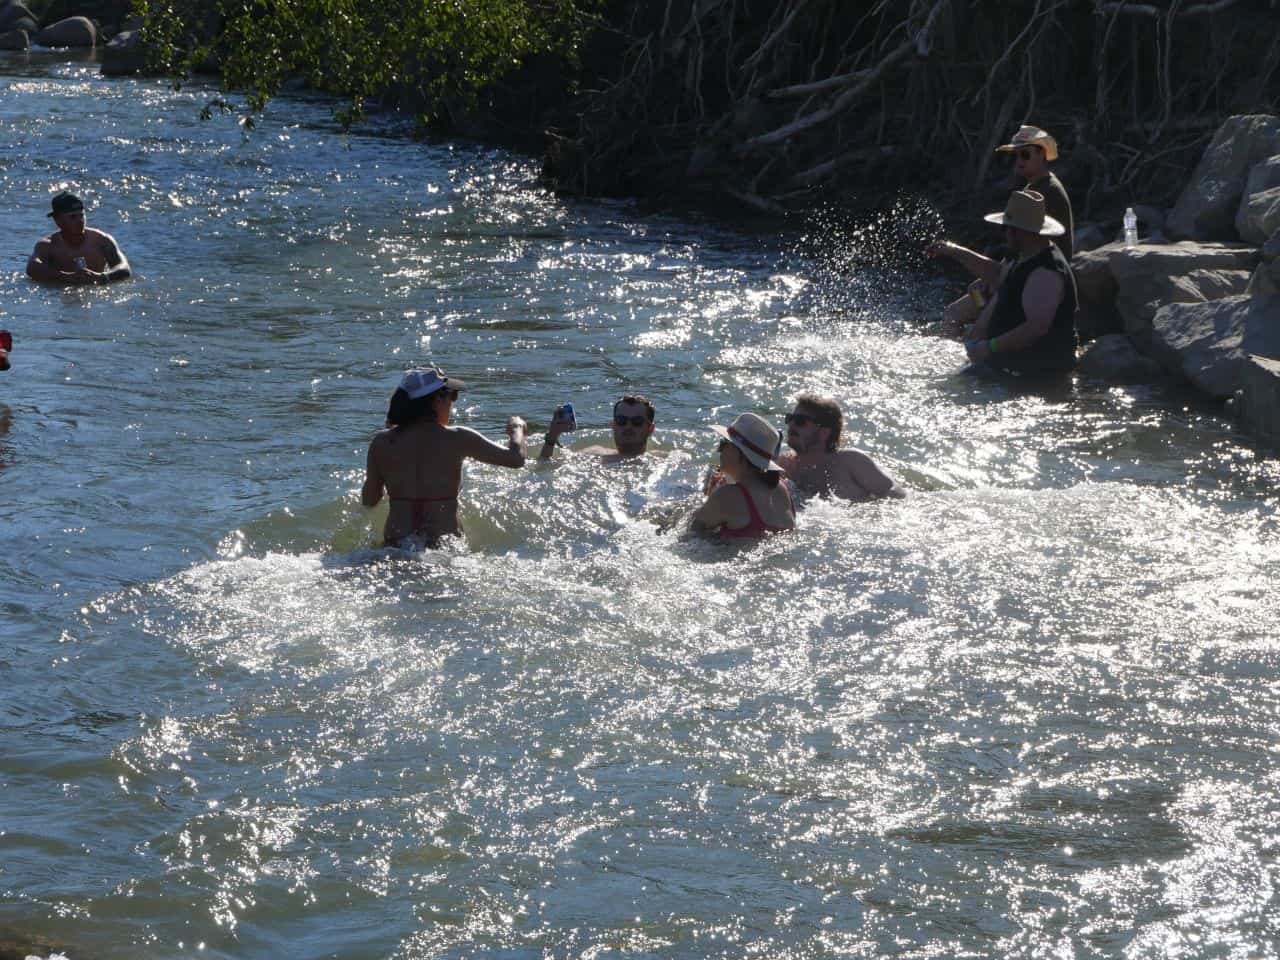 Festival goers take some time relax and cool down in the coll waters of the Coldwater River.